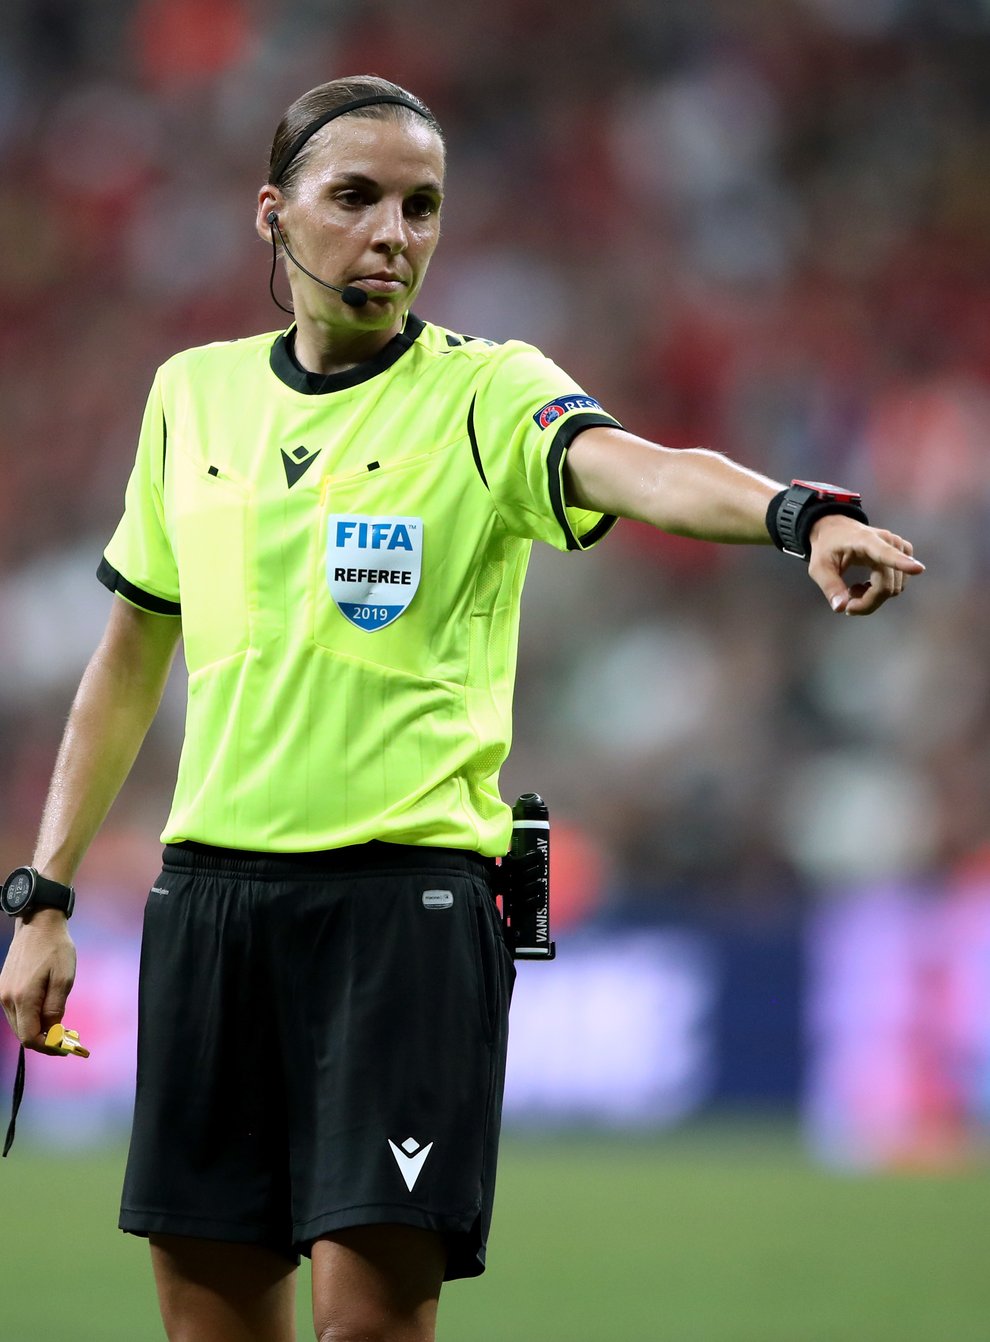 Stephanie Frappart is one of three female referees who will take charge at the World Cup in Qatar (Nick Potts/PA)